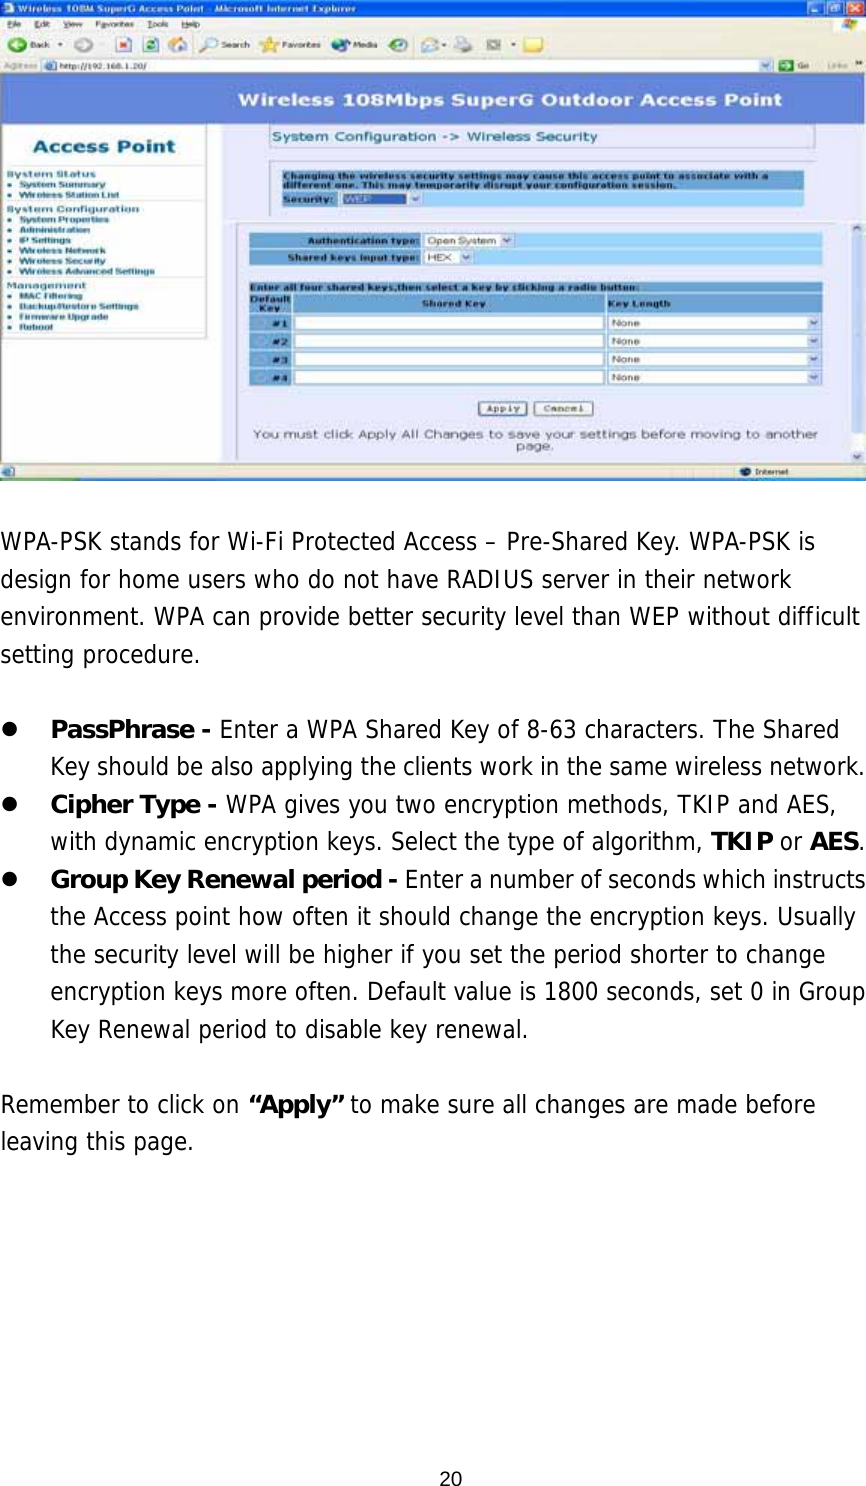  20  WPA-PSK stands for Wi-Fi Protected Access – Pre-Shared Key. WPA-PSK is design for home users who do not have RADIUS server in their network environment. WPA can provide better security level than WEP without difficult setting procedure.    PassPhrase - Enter a WPA Shared Key of 8-63 characters. The Shared Key should be also applying the clients work in the same wireless network.   Cipher Type - WPA gives you two encryption methods, TKIP and AES, with dynamic encryption keys. Select the type of algorithm, TKIP or AES.    Group Key Renewal period - Enter a number of seconds which instructs the Access point how often it should change the encryption keys. Usually the security level will be higher if you set the period shorter to change encryption keys more often. Default value is 1800 seconds, set 0 in Group Key Renewal period to disable key renewal.   Remember to click on “Apply” to make sure all changes are made before leaving this page.  